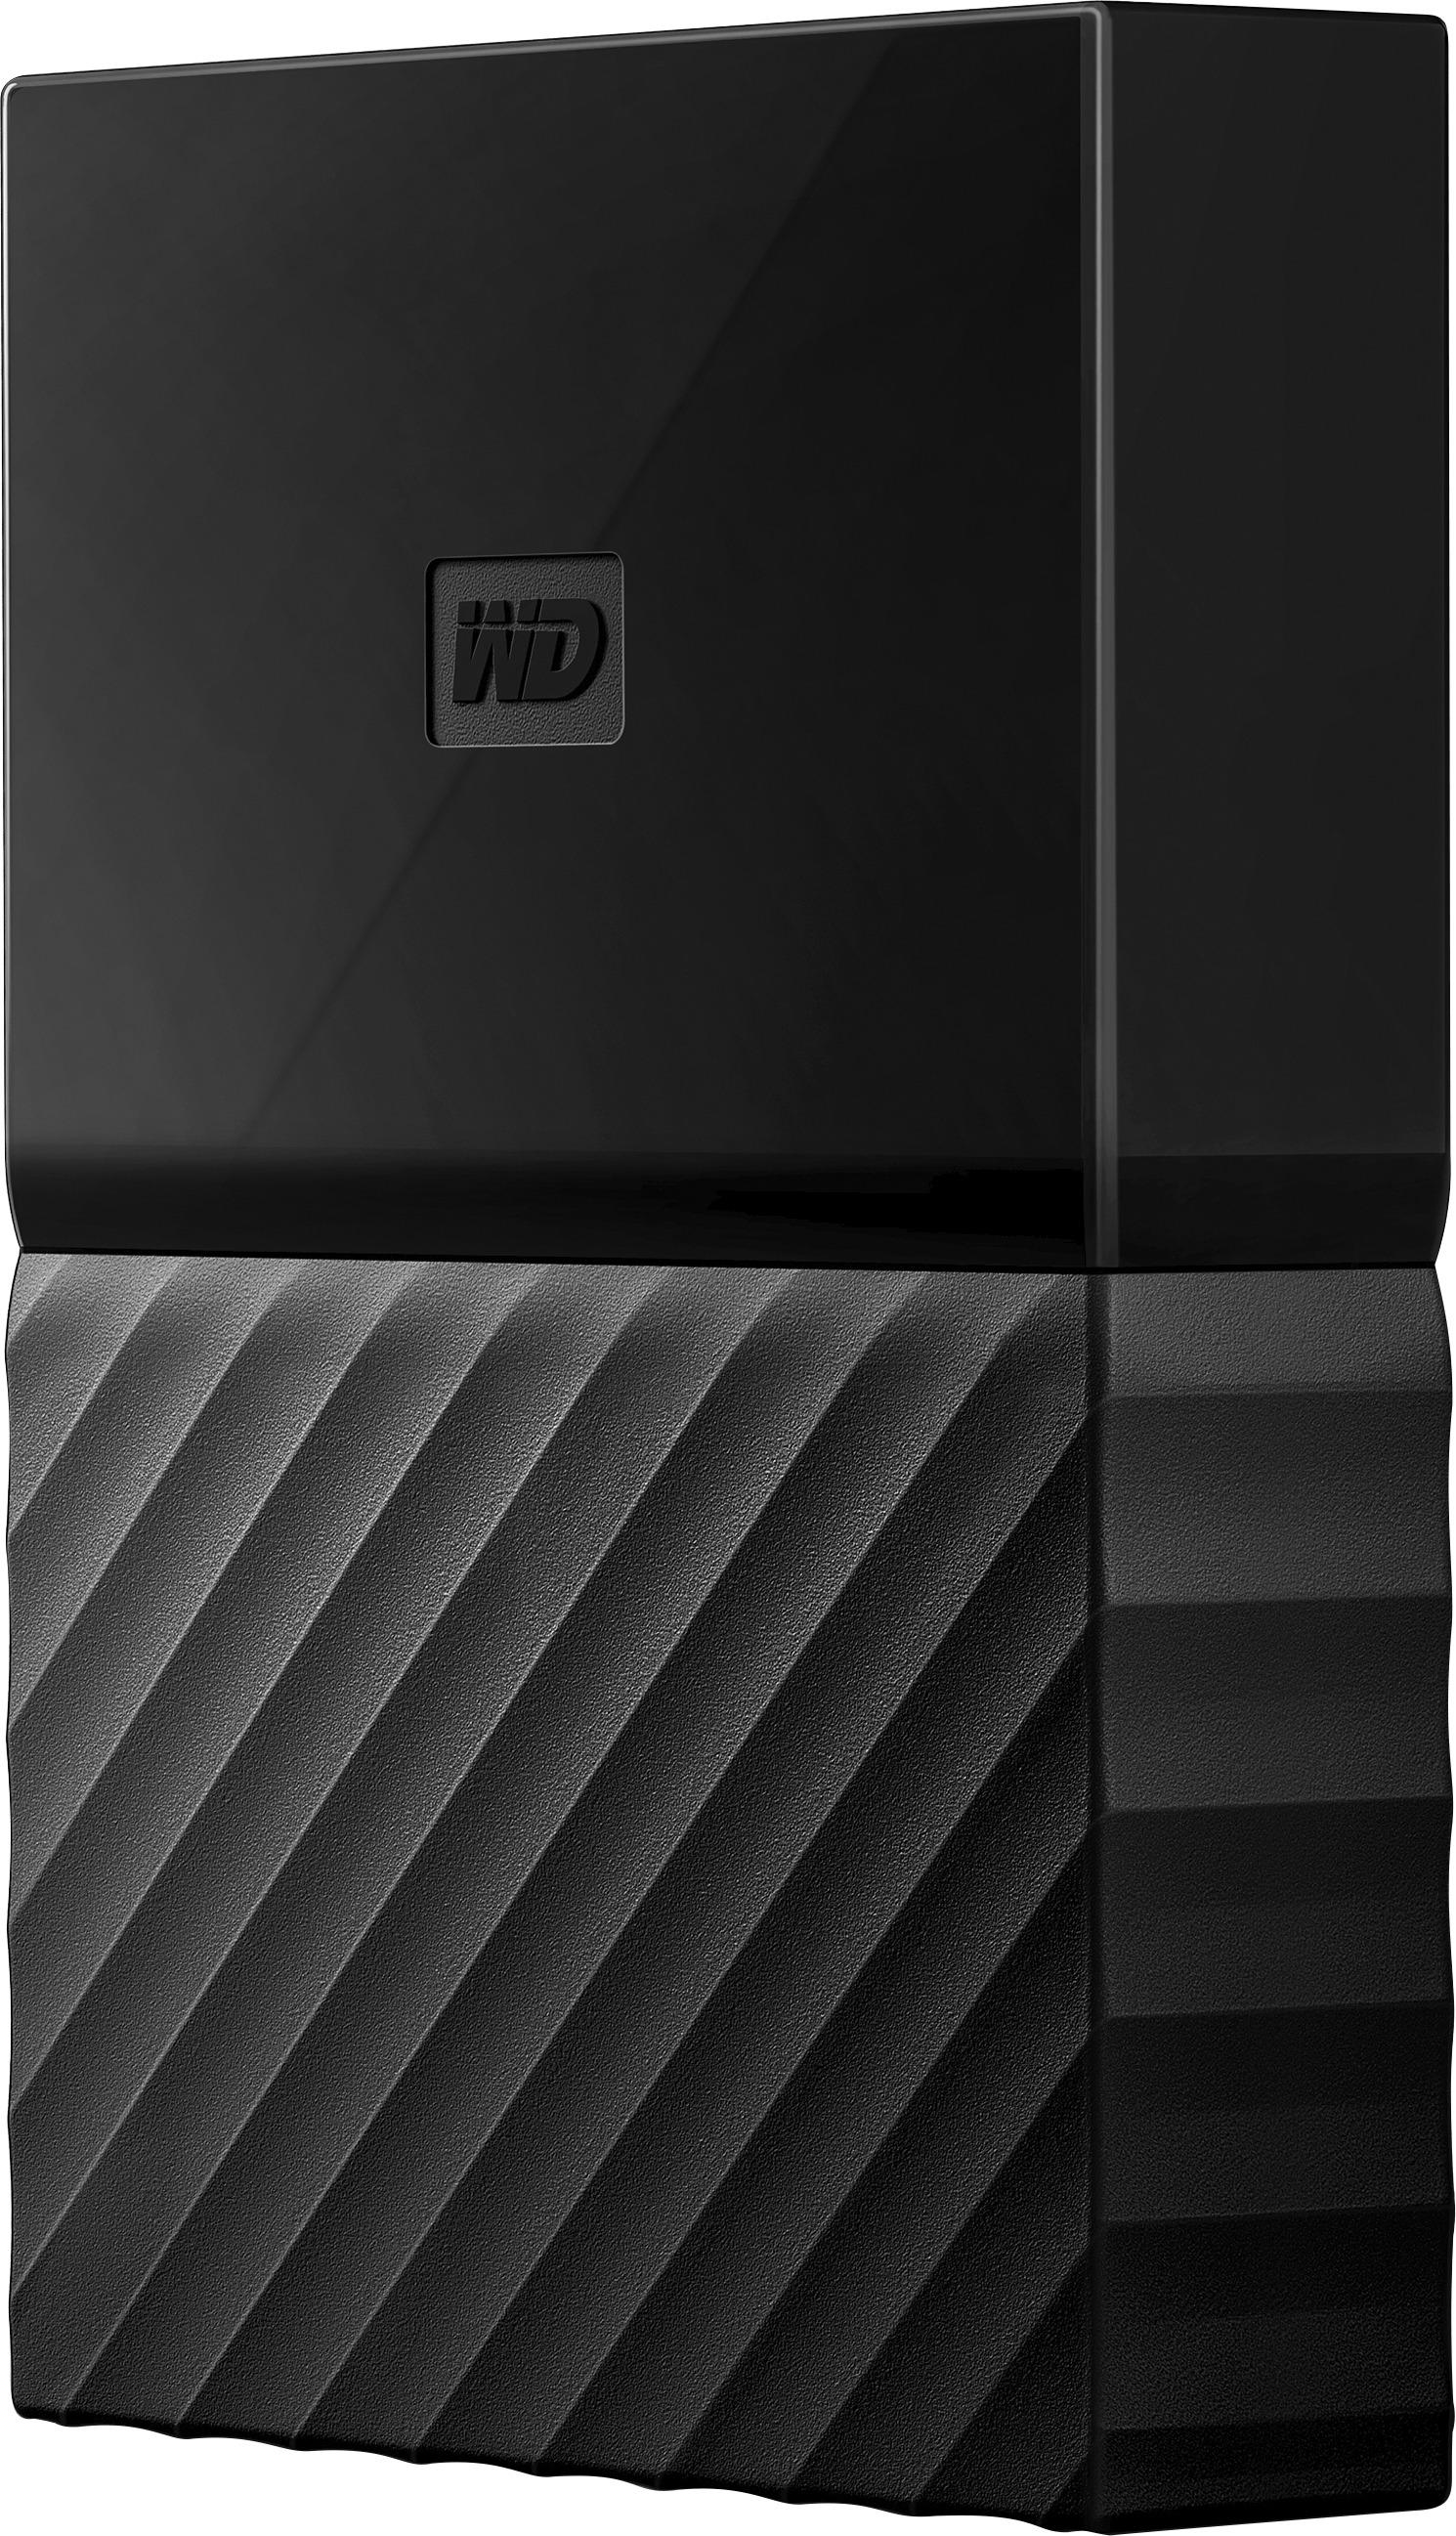 wd 4tb gaming drive works with playstation 4 portable external hard drive